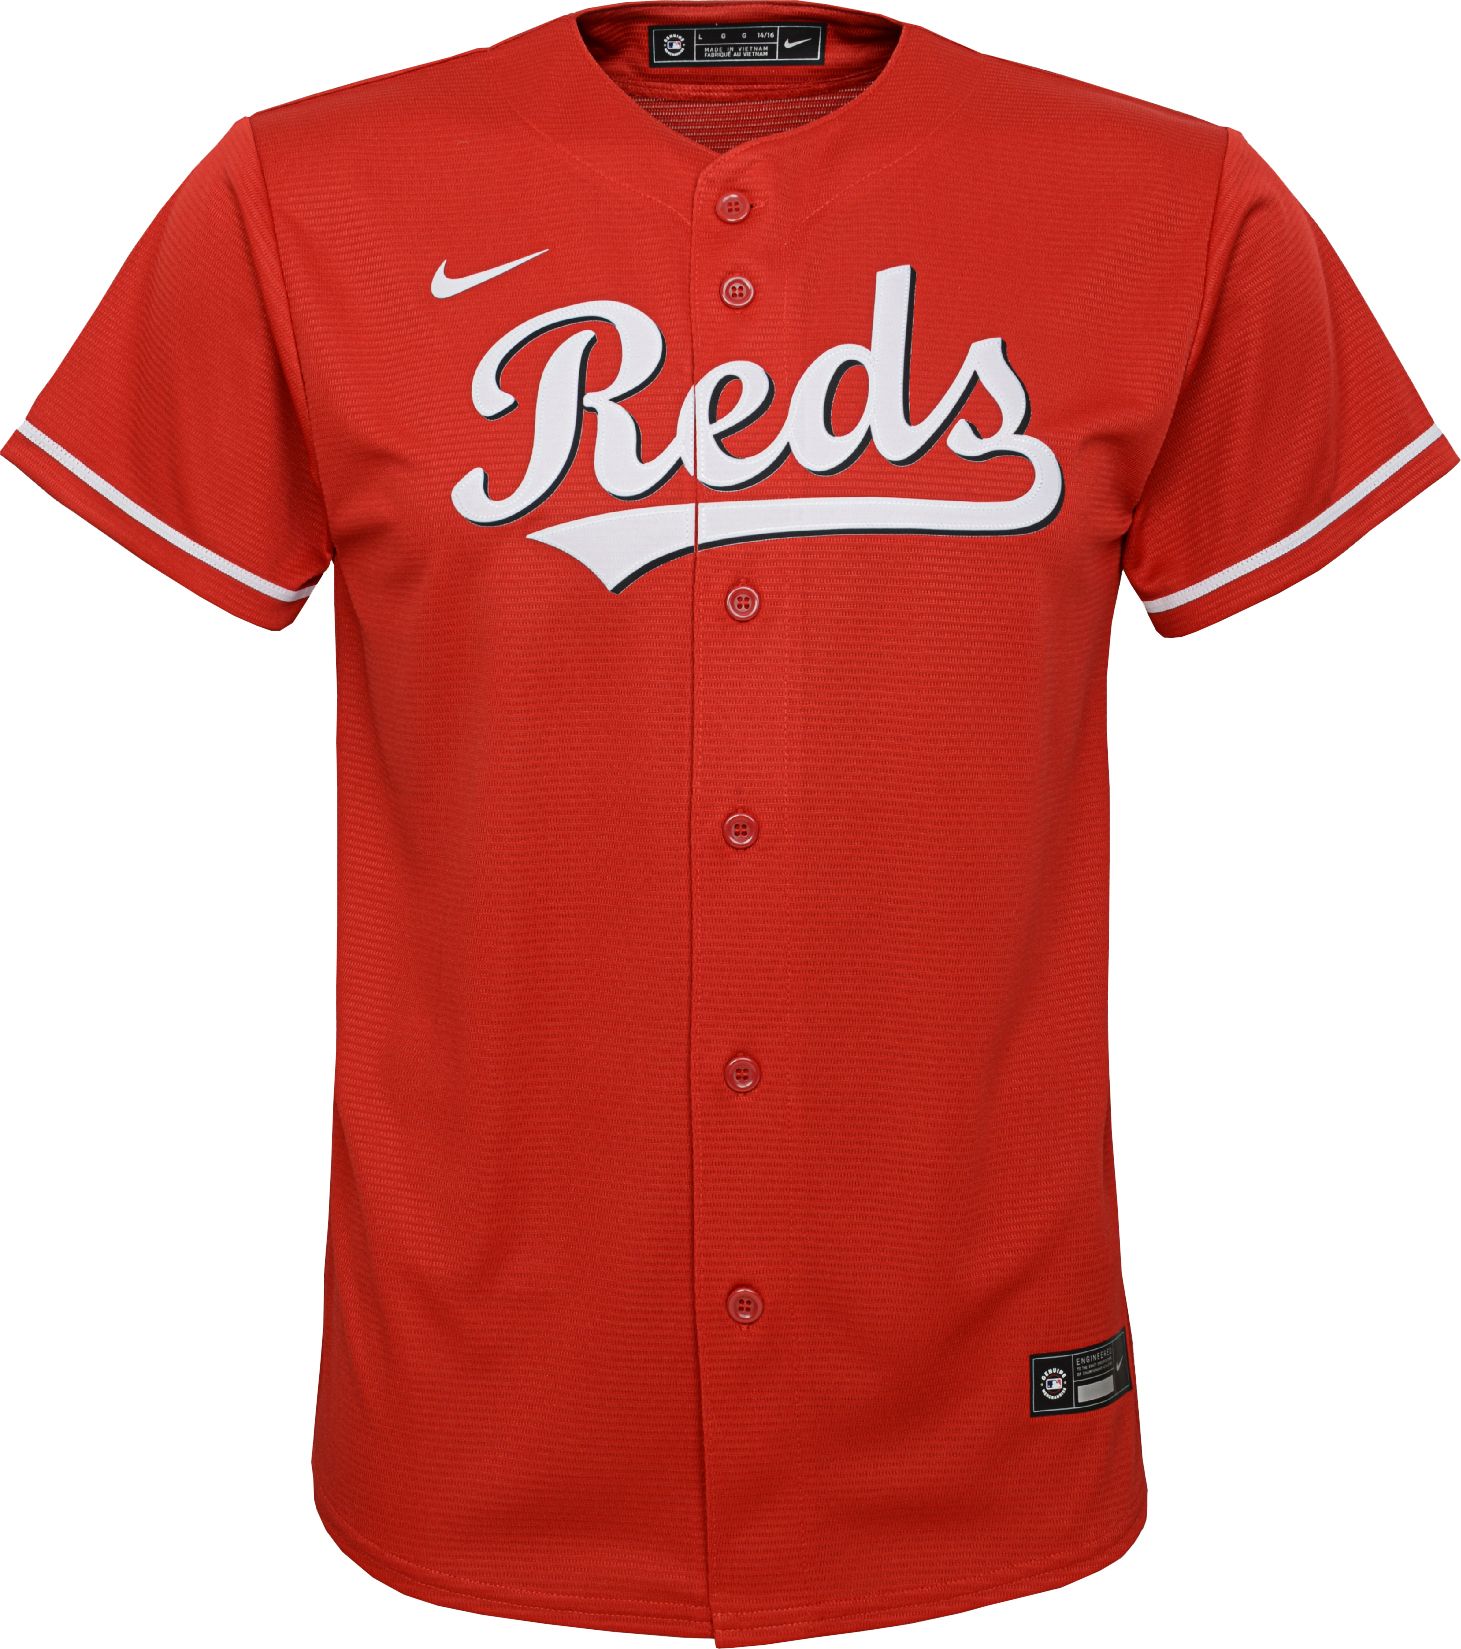 Red Reds jersey